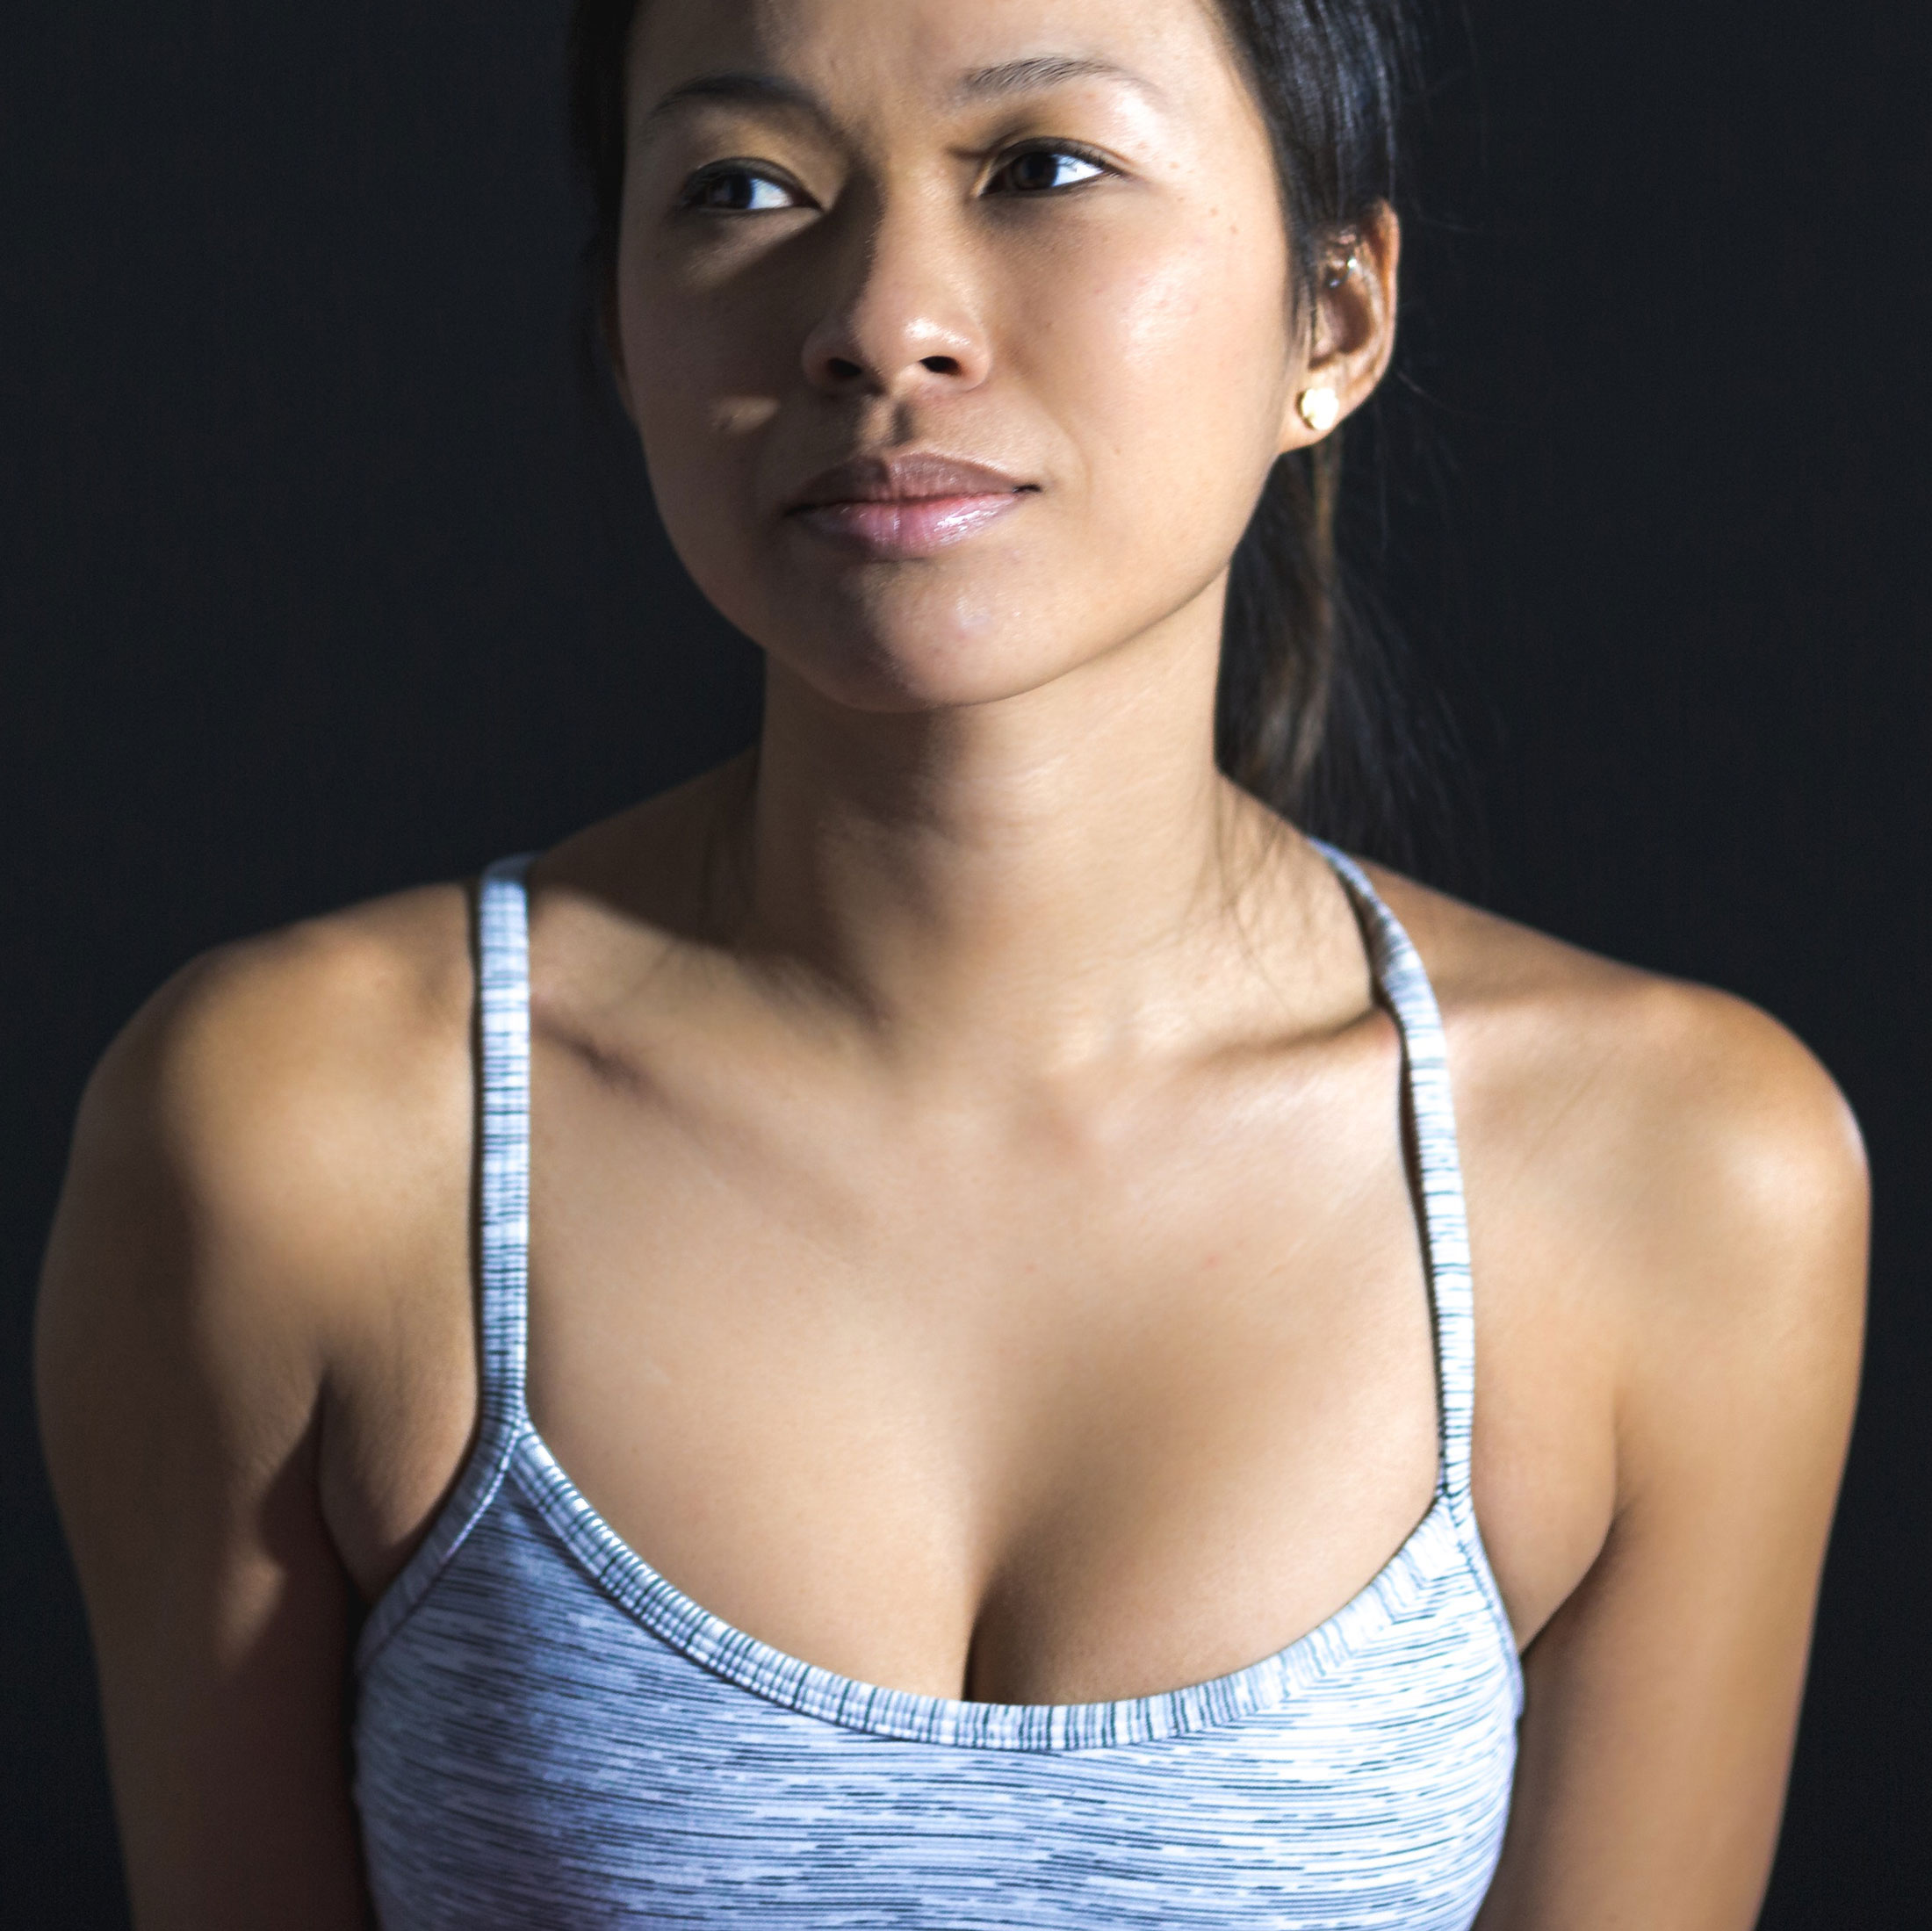 A picture of a woman from the chest up, wearing a grey sports bra.